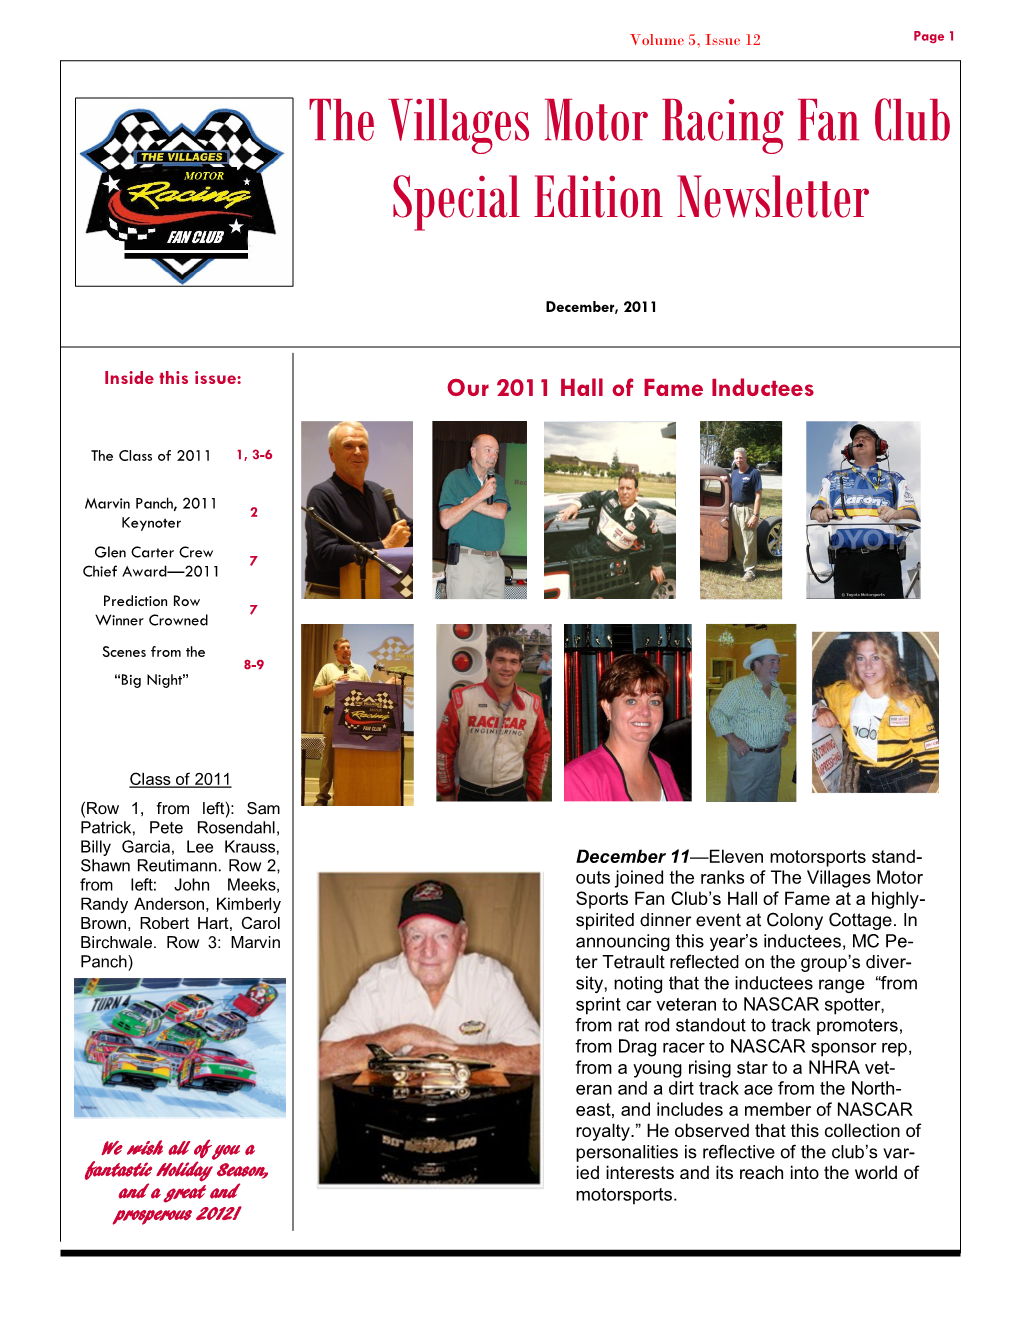 The Villages Motor Racing Fan Club Special Edition Newsletter